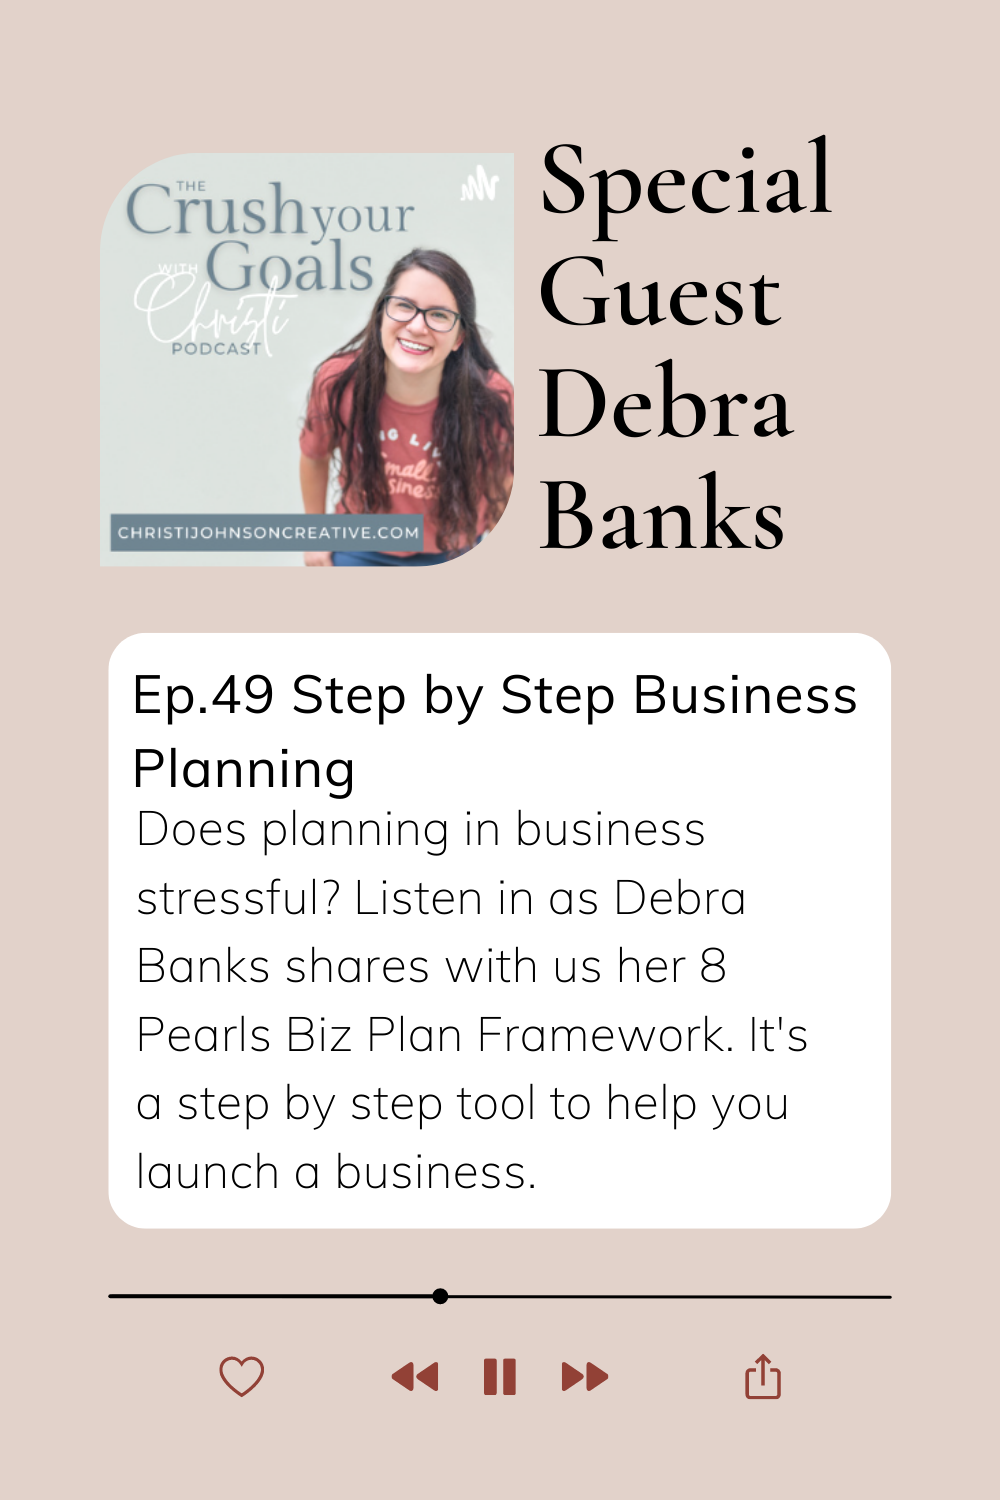 Pink background with image of Christi and description of episode 49: step by step business planning approach.